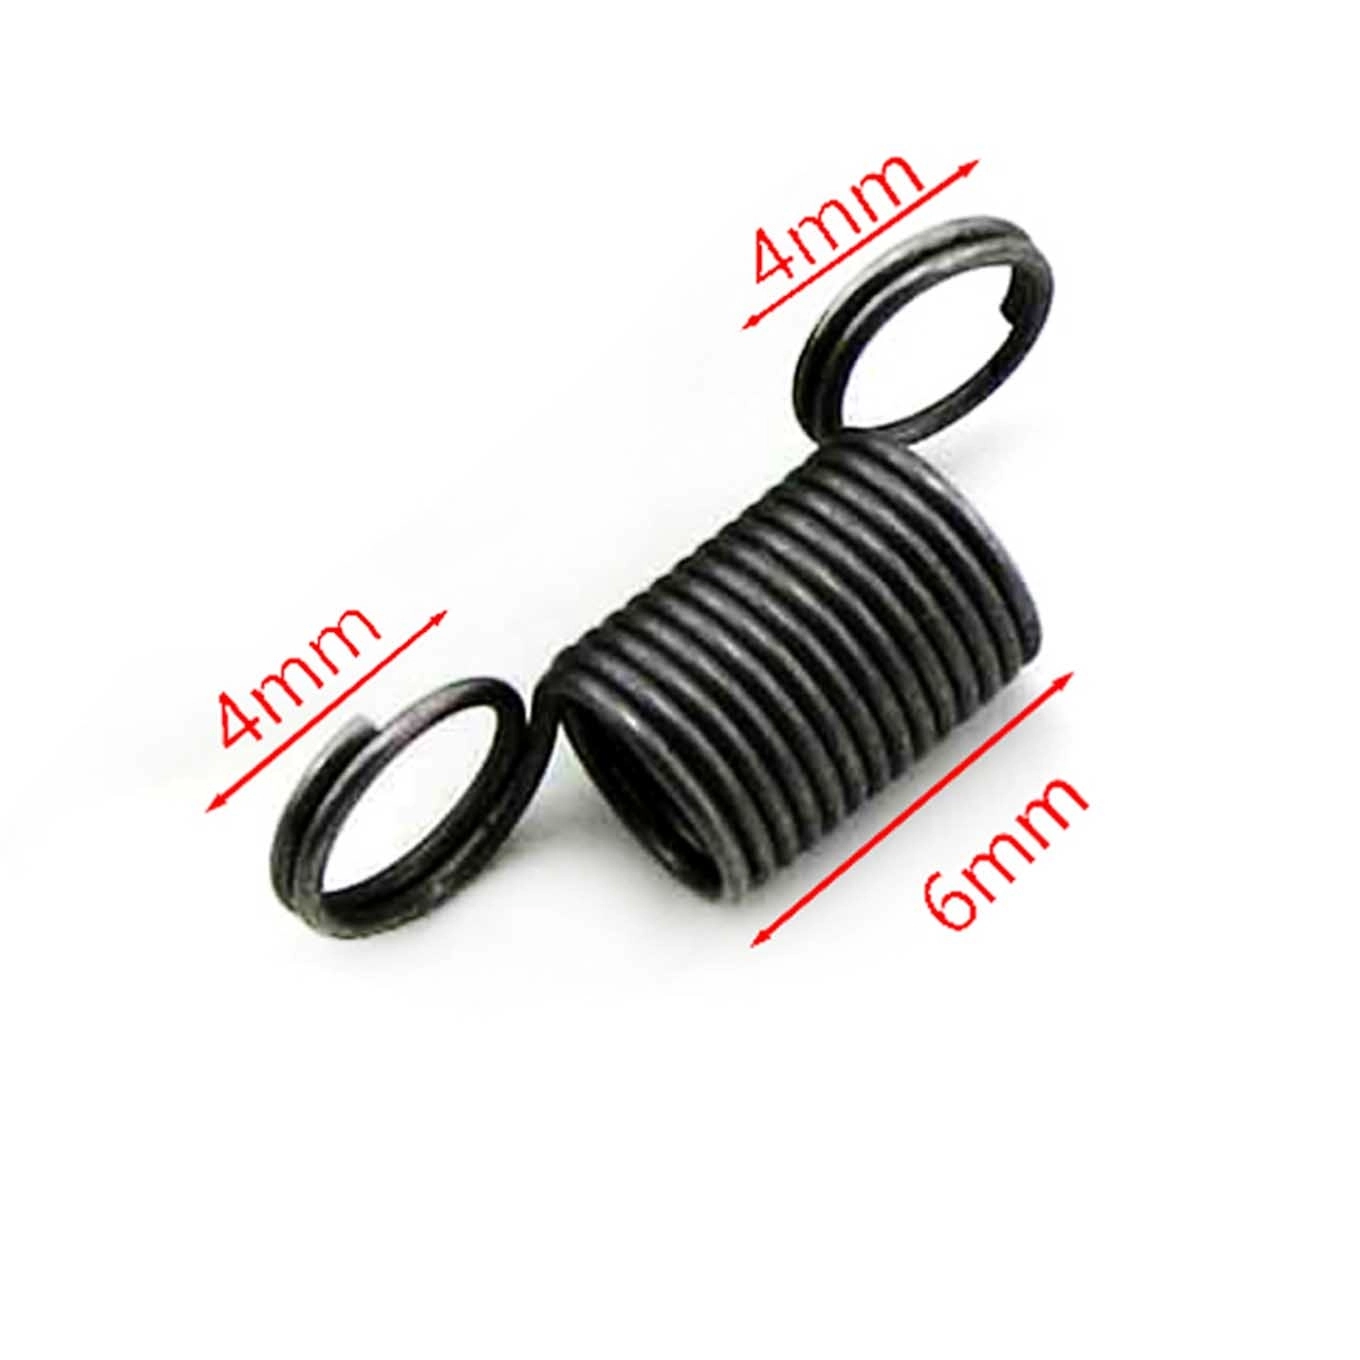 10pcs/Lot Stainless Steel Small Tension Spring With Hook For